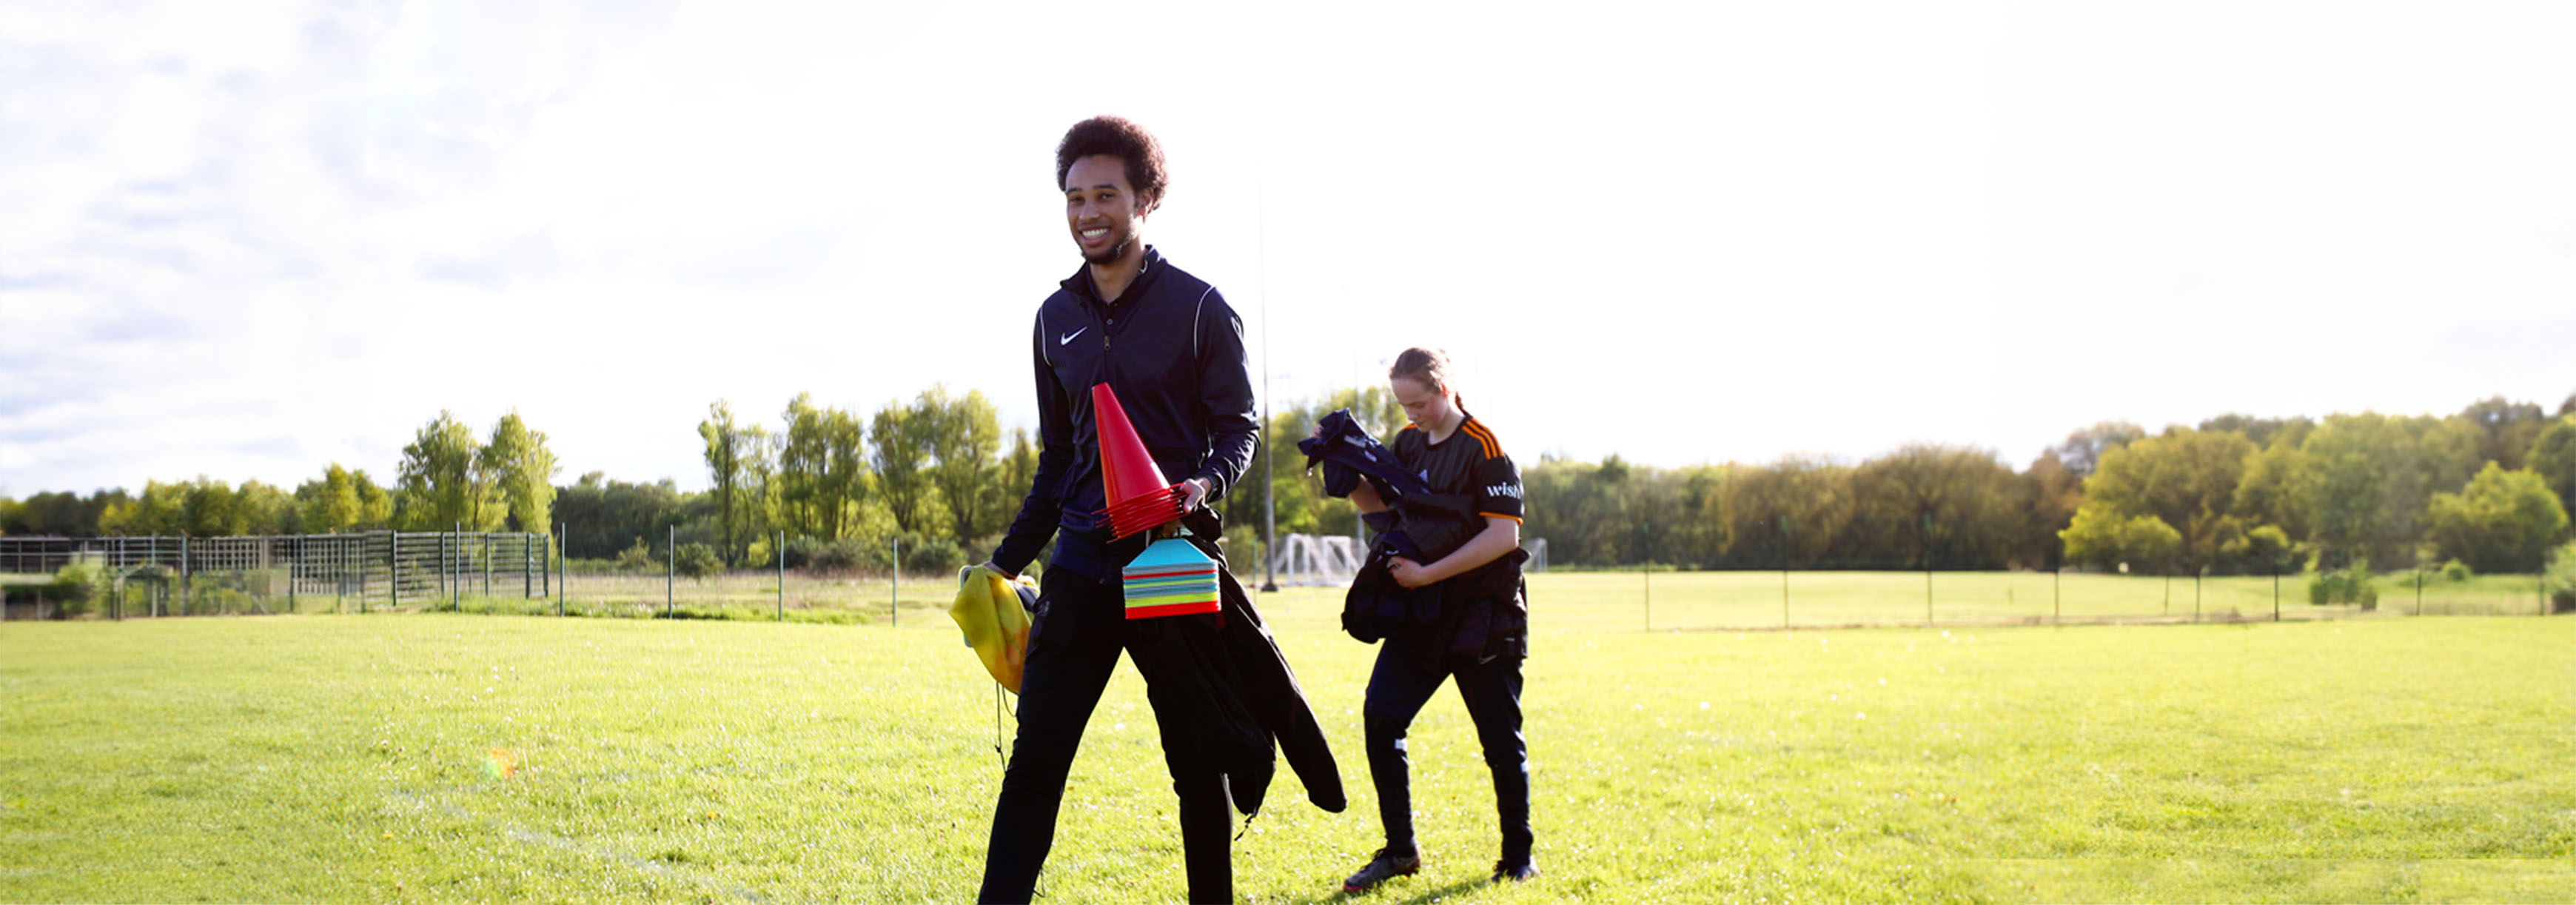 A coach walks onto a grass pitch holding some cones and a bag of bibs.